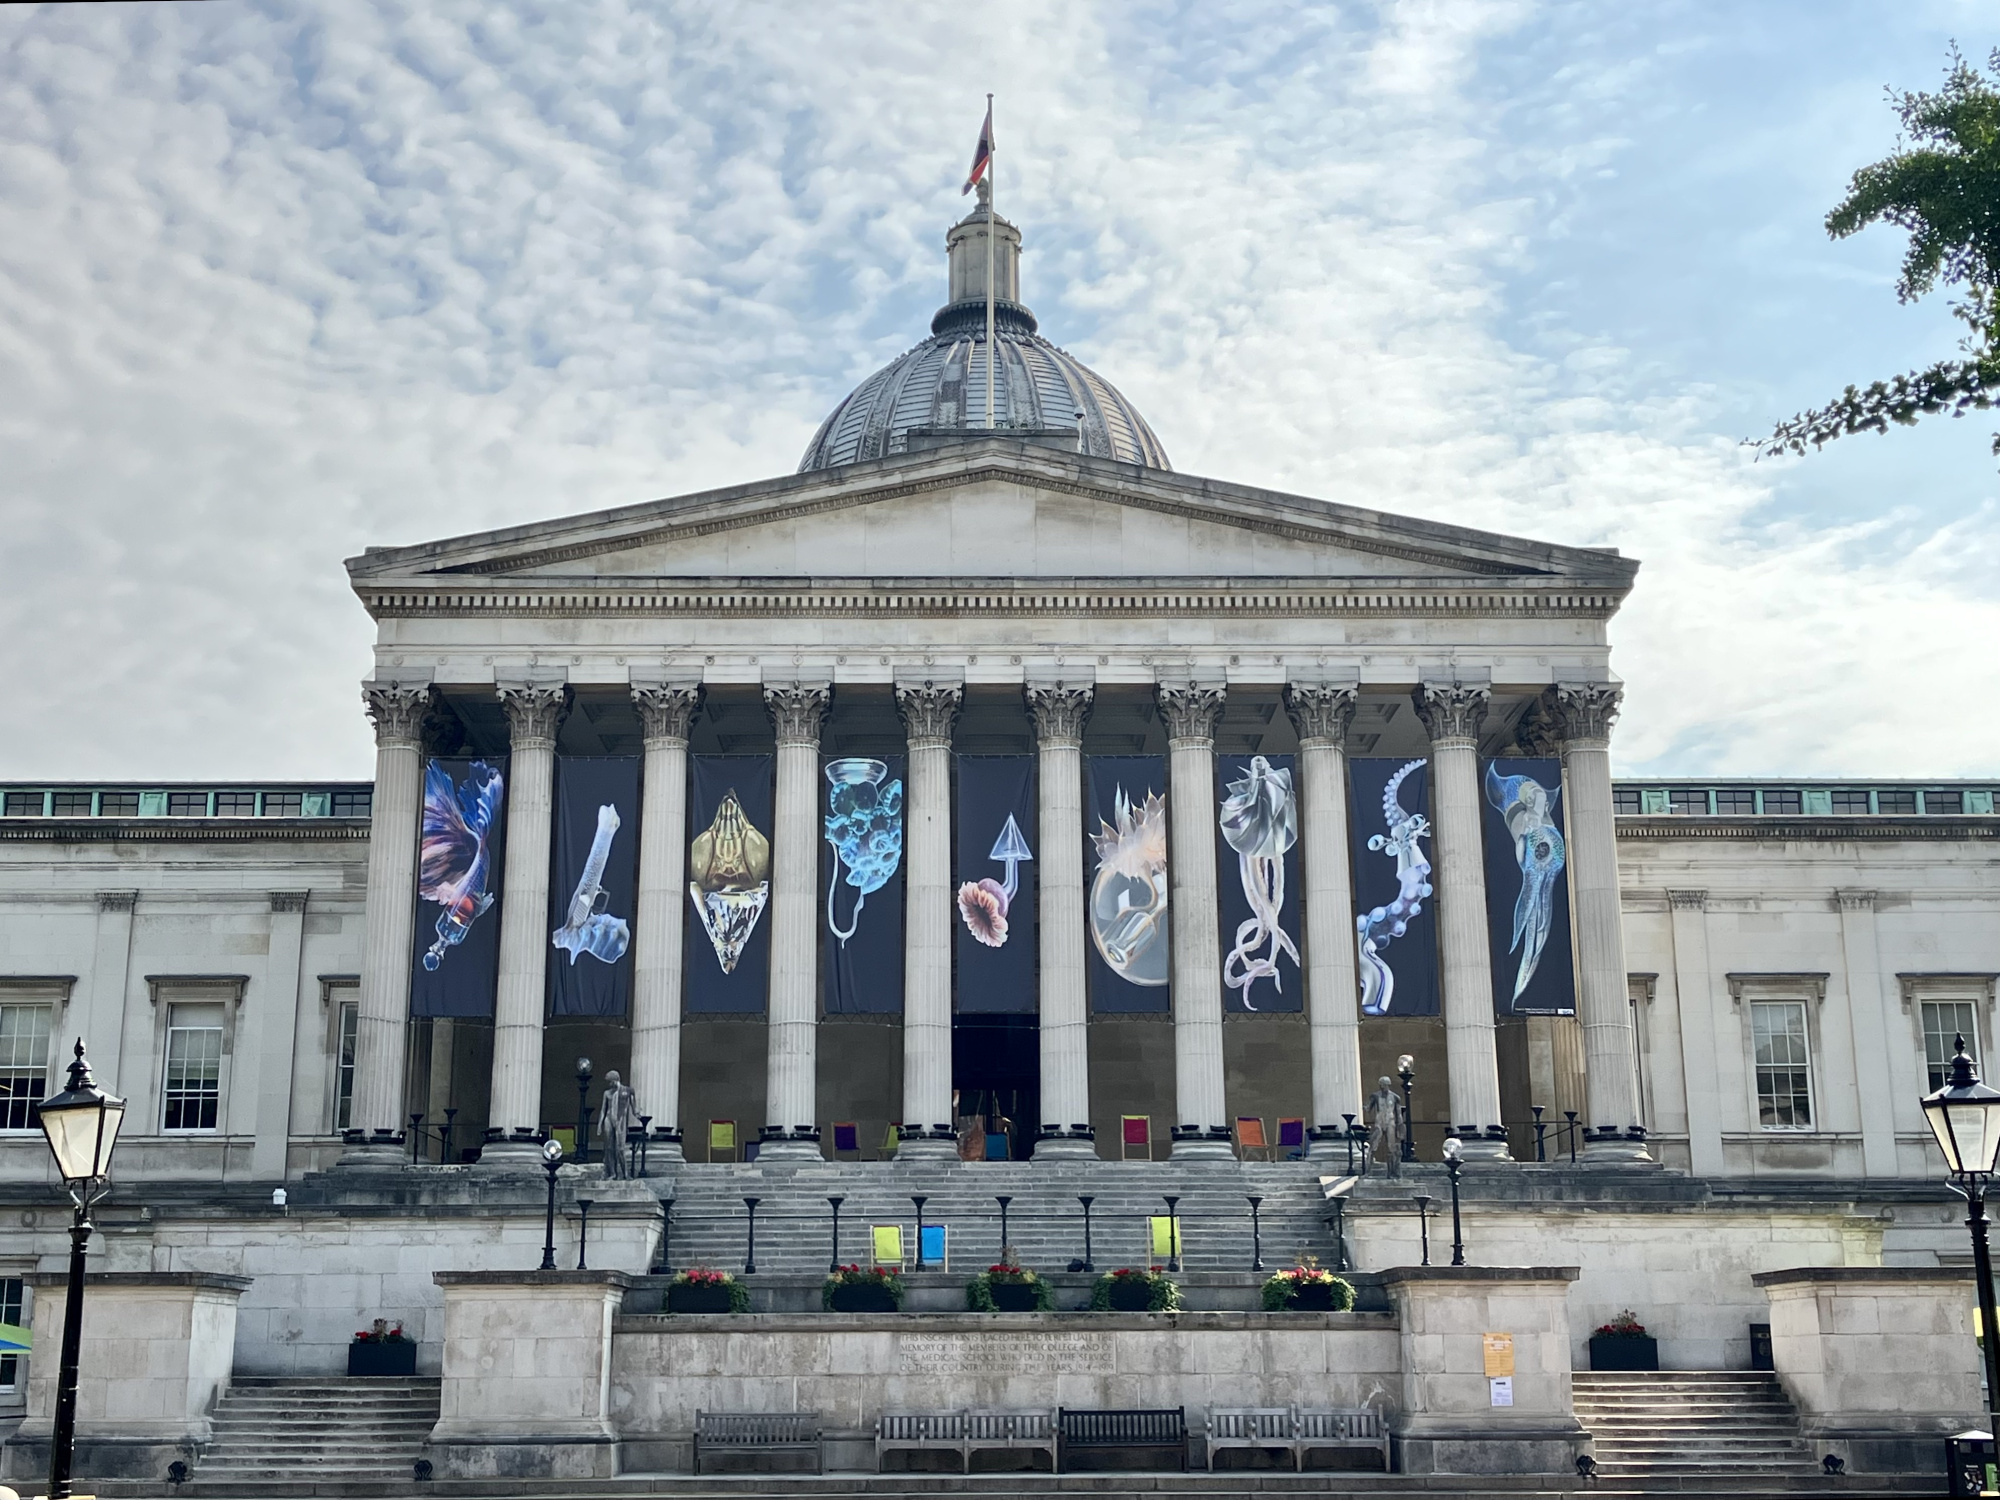 UCL Portico with banners depicting animal/aquatic life forms